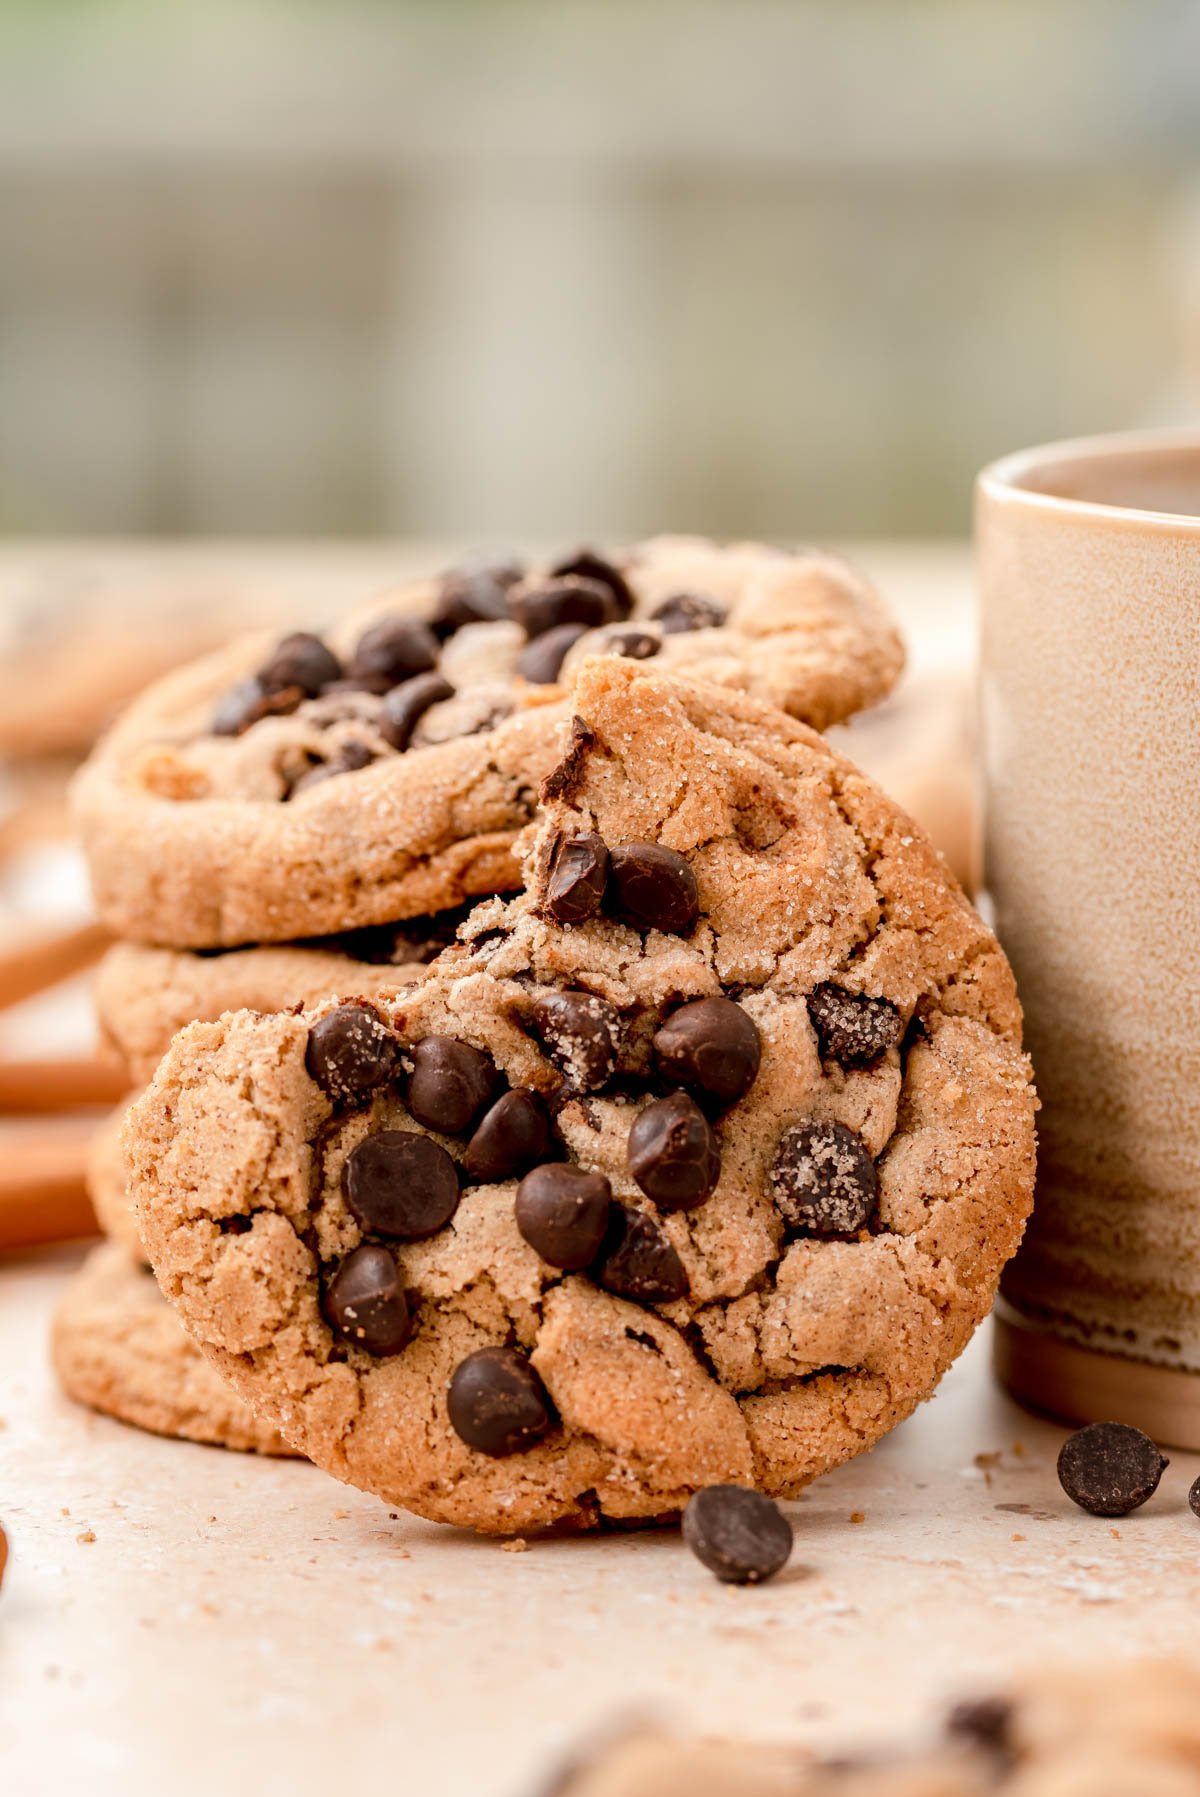 A stack of cinnamon chocolate chip cookies with one with a bite missing resting on the stack near a mug.